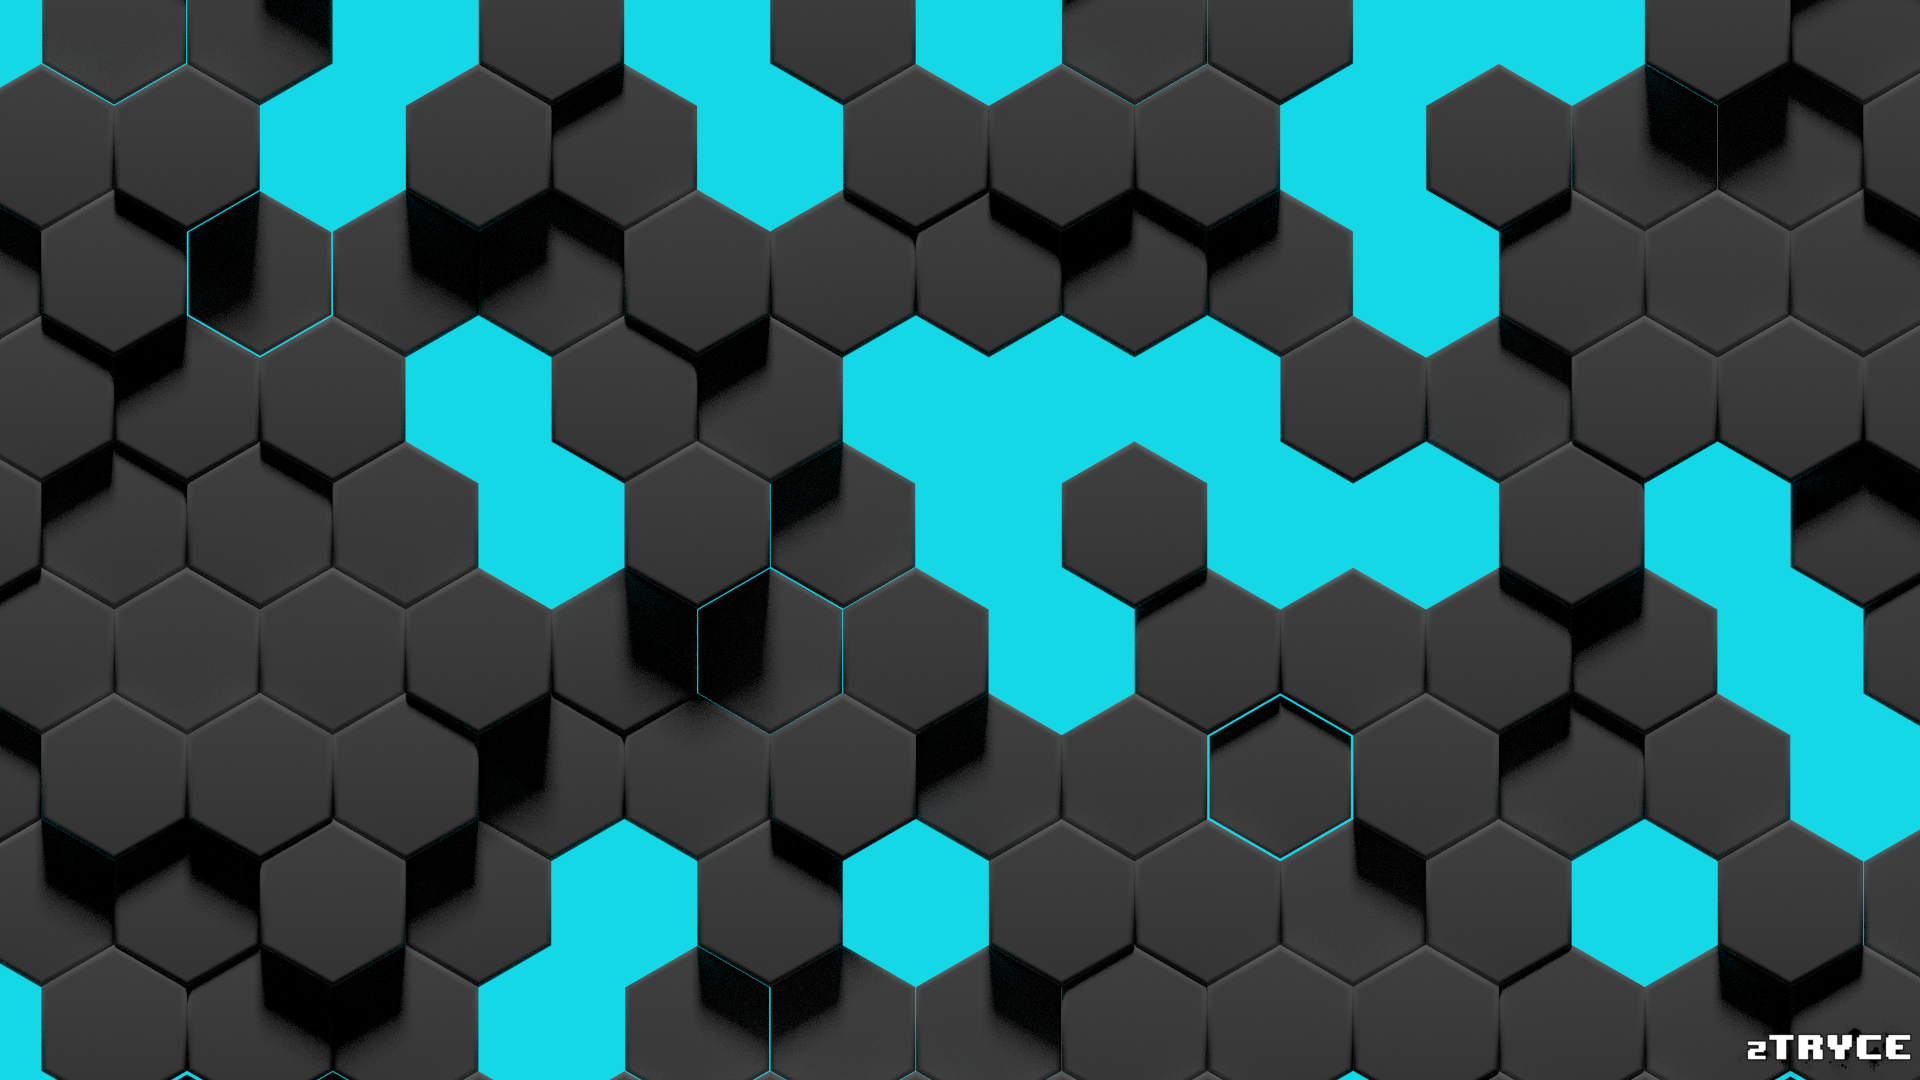 Hexagon Wallpaper 1080p Ortographic By Ztryce On HD Wallpapers Download Free Images Wallpaper [wallpaper981.blogspot.com]